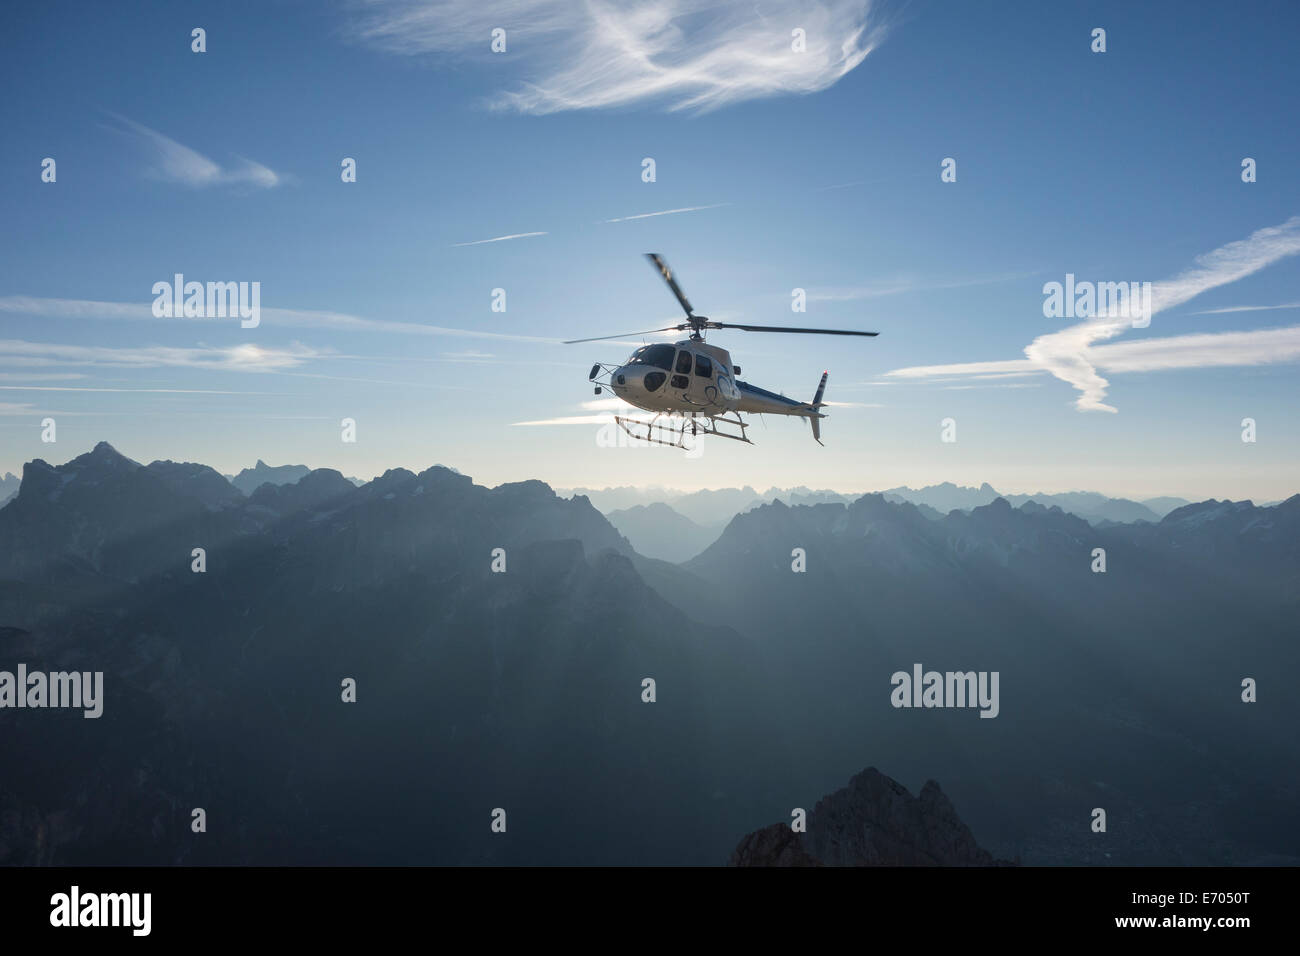 Helicopter on scenic flight at sunrise, Alleghe, Dolomites, Italy Stock Photo